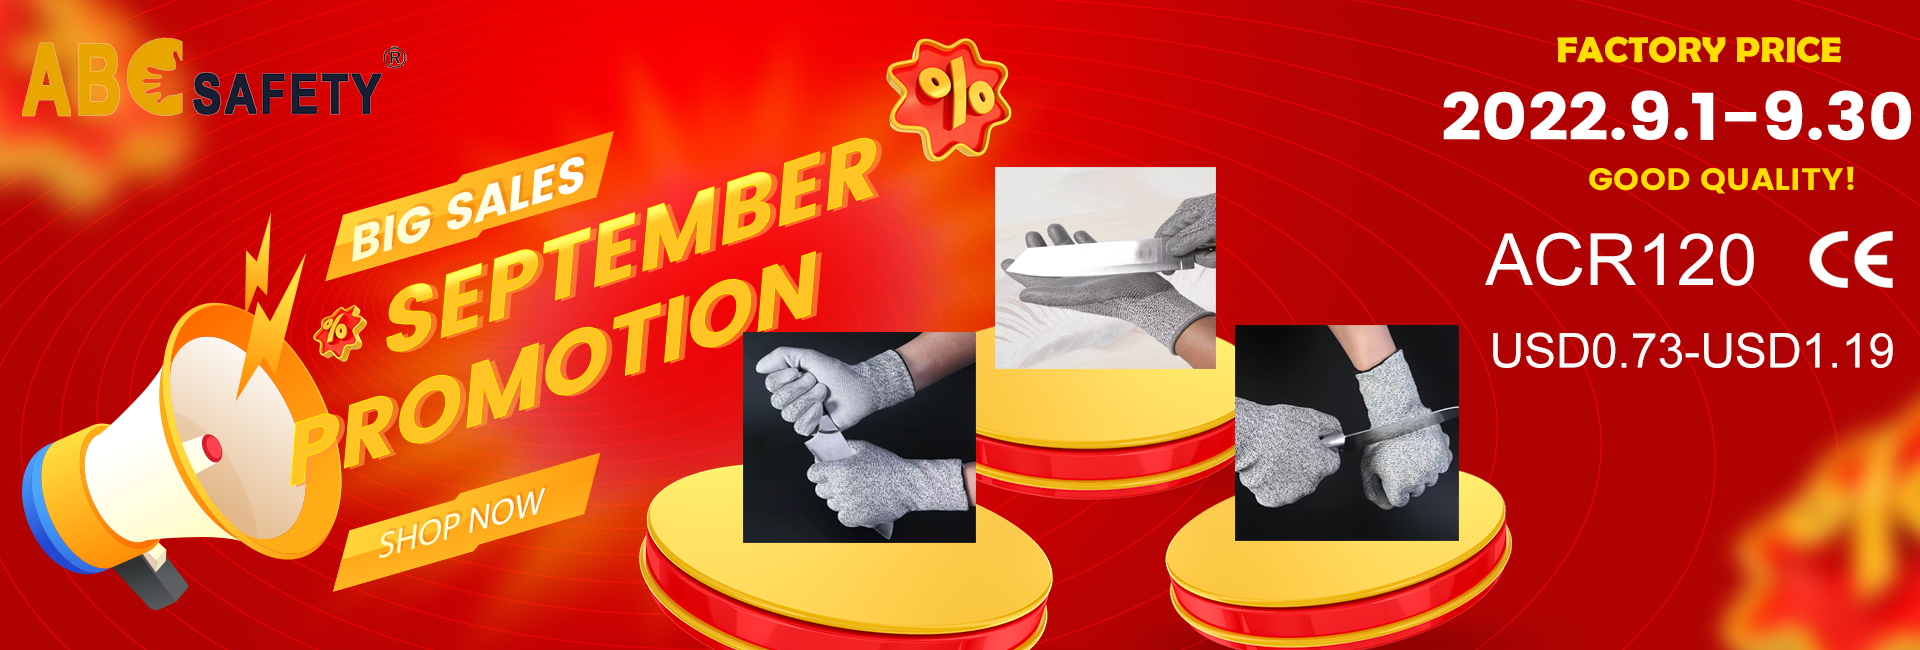 September New Trade Festival Promotions - Anti-cut Gloves